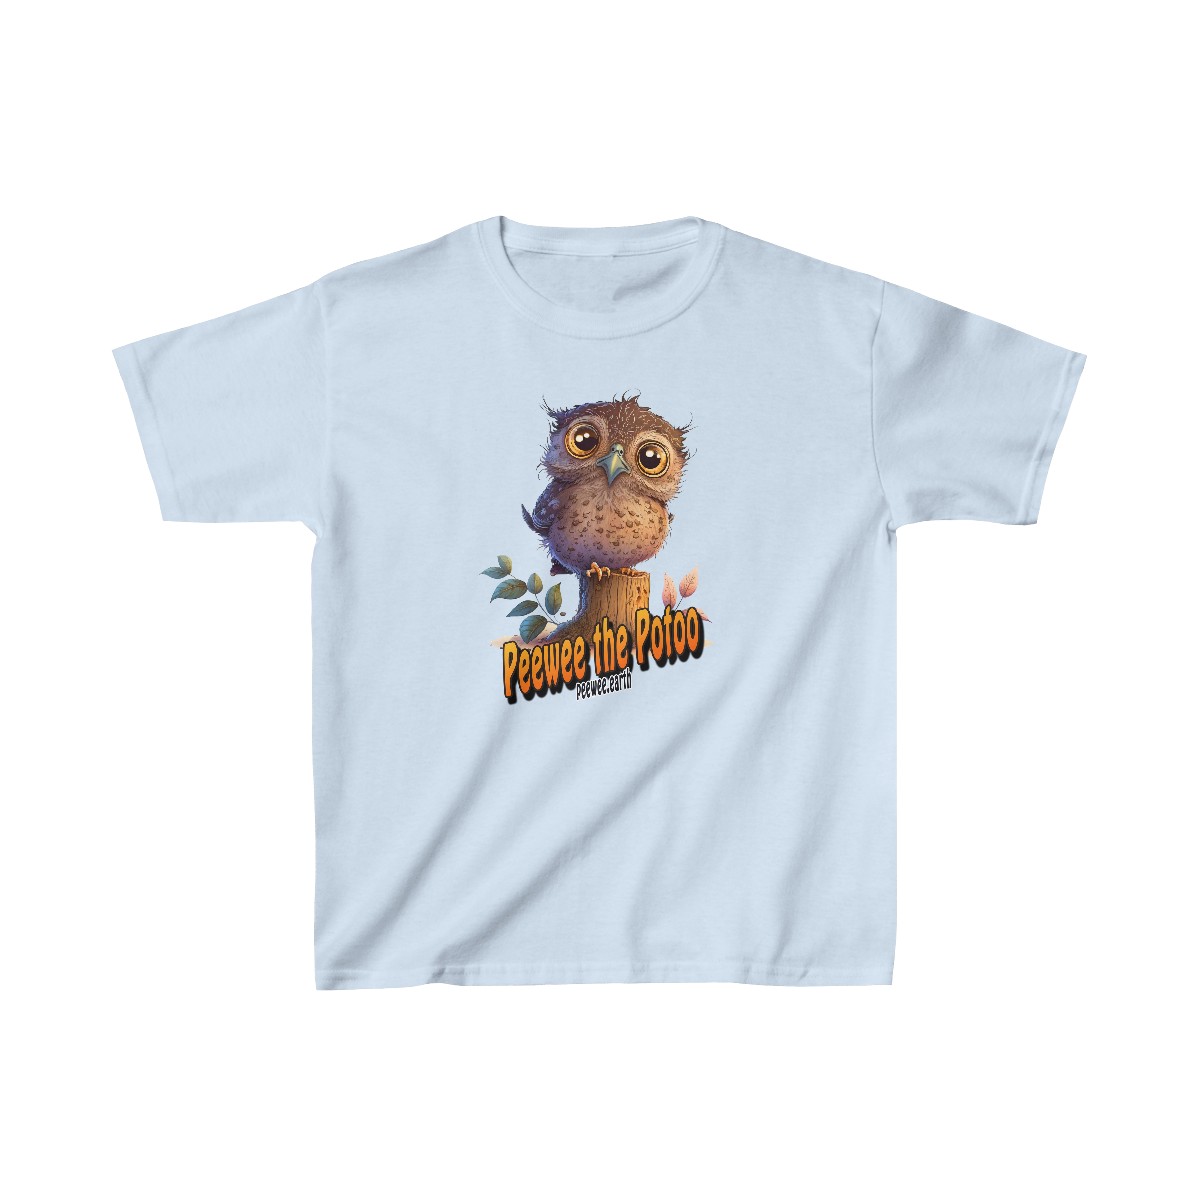 Official Peewee the Potoo youth t-shirt - Comfy Peewee product thumbnail image